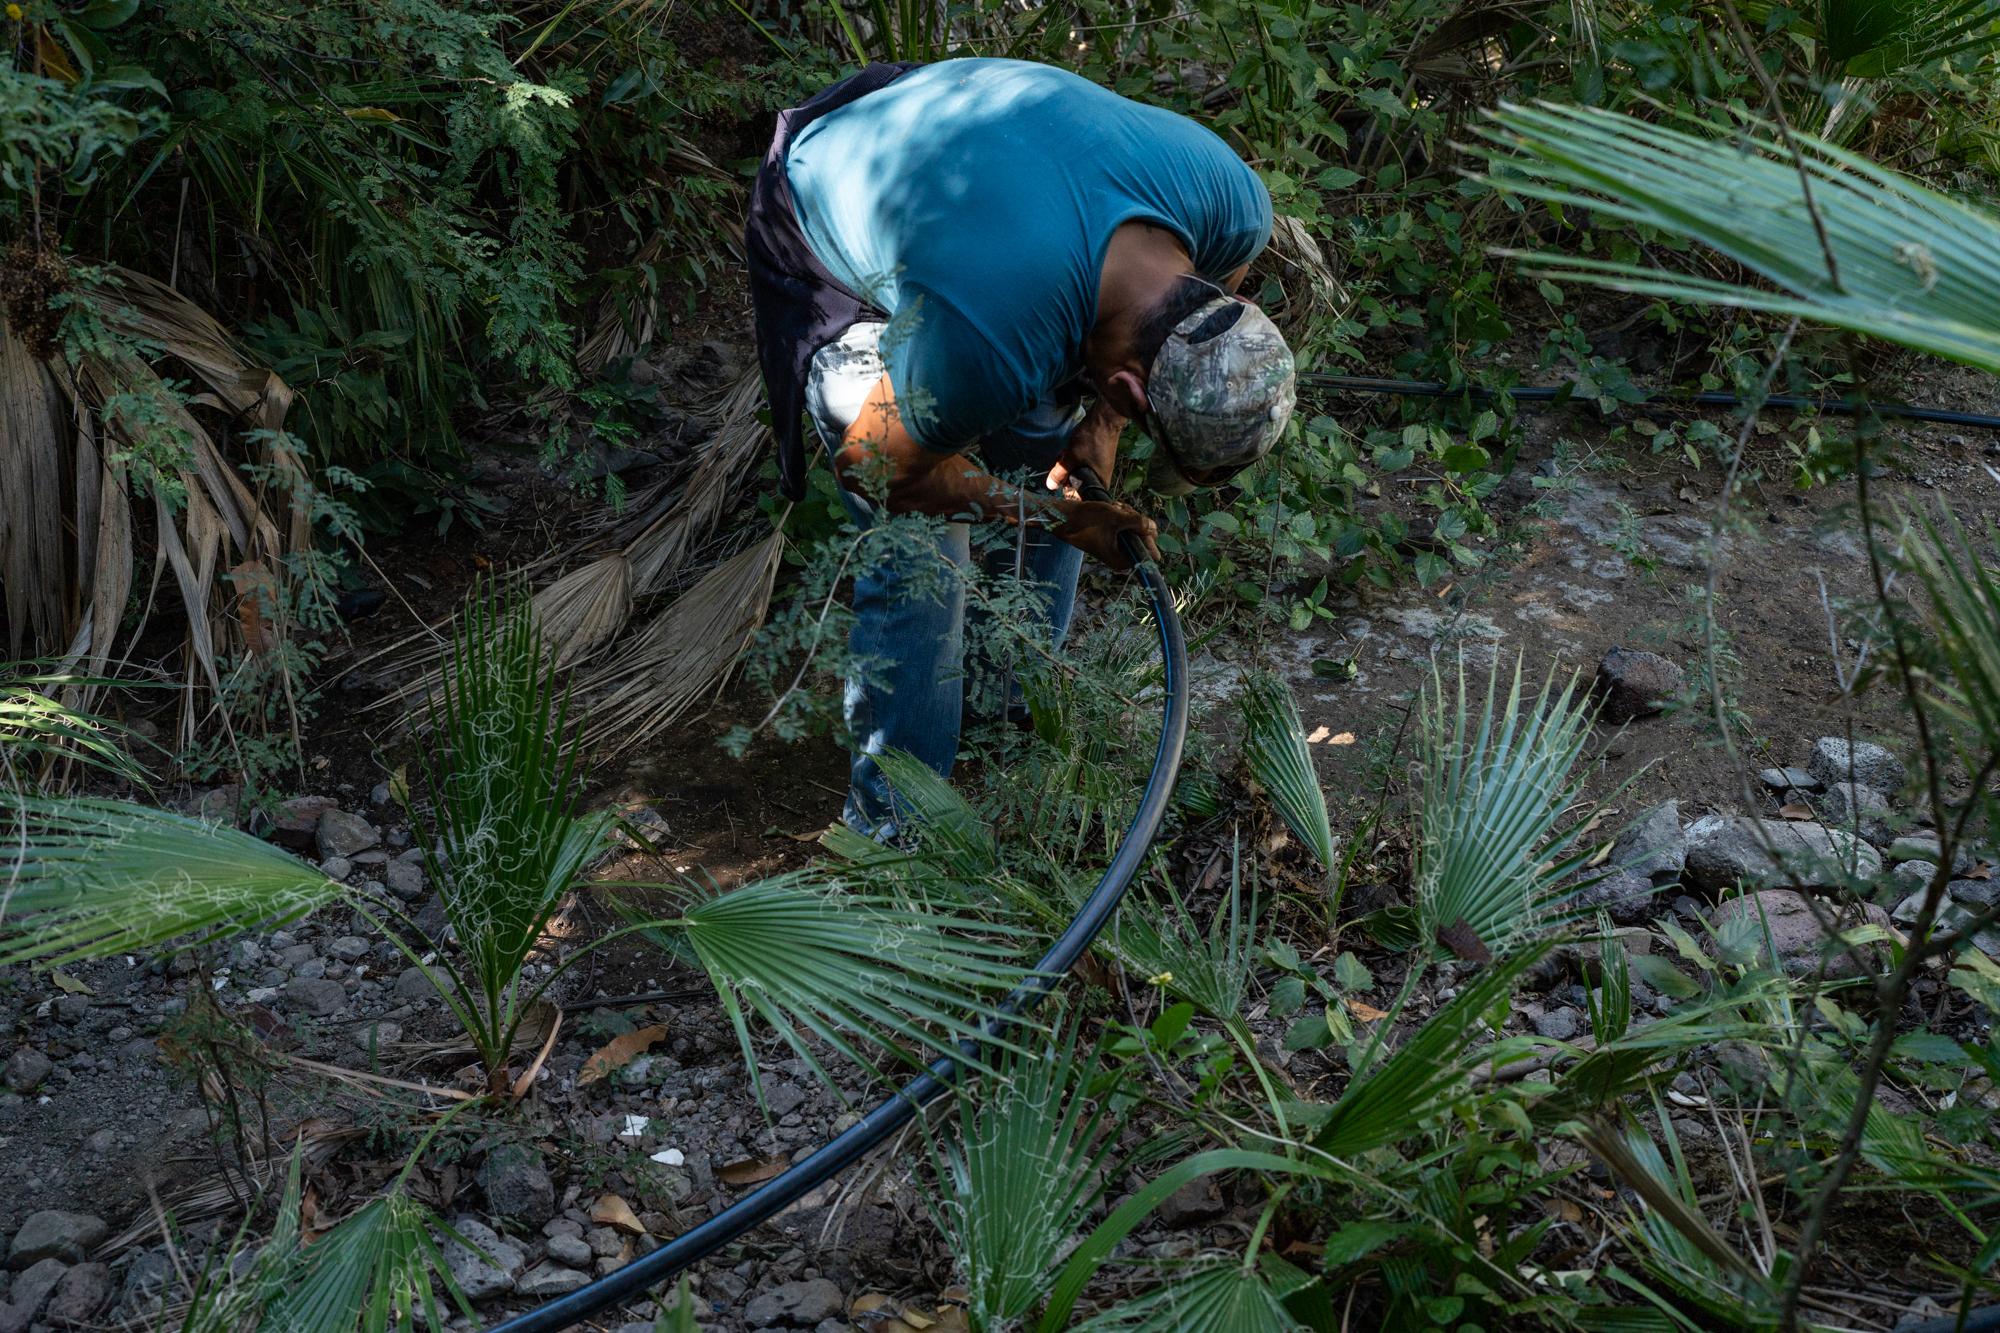 Until We Are Gone  - Enrique fixes a leaking hose that is used to transport...